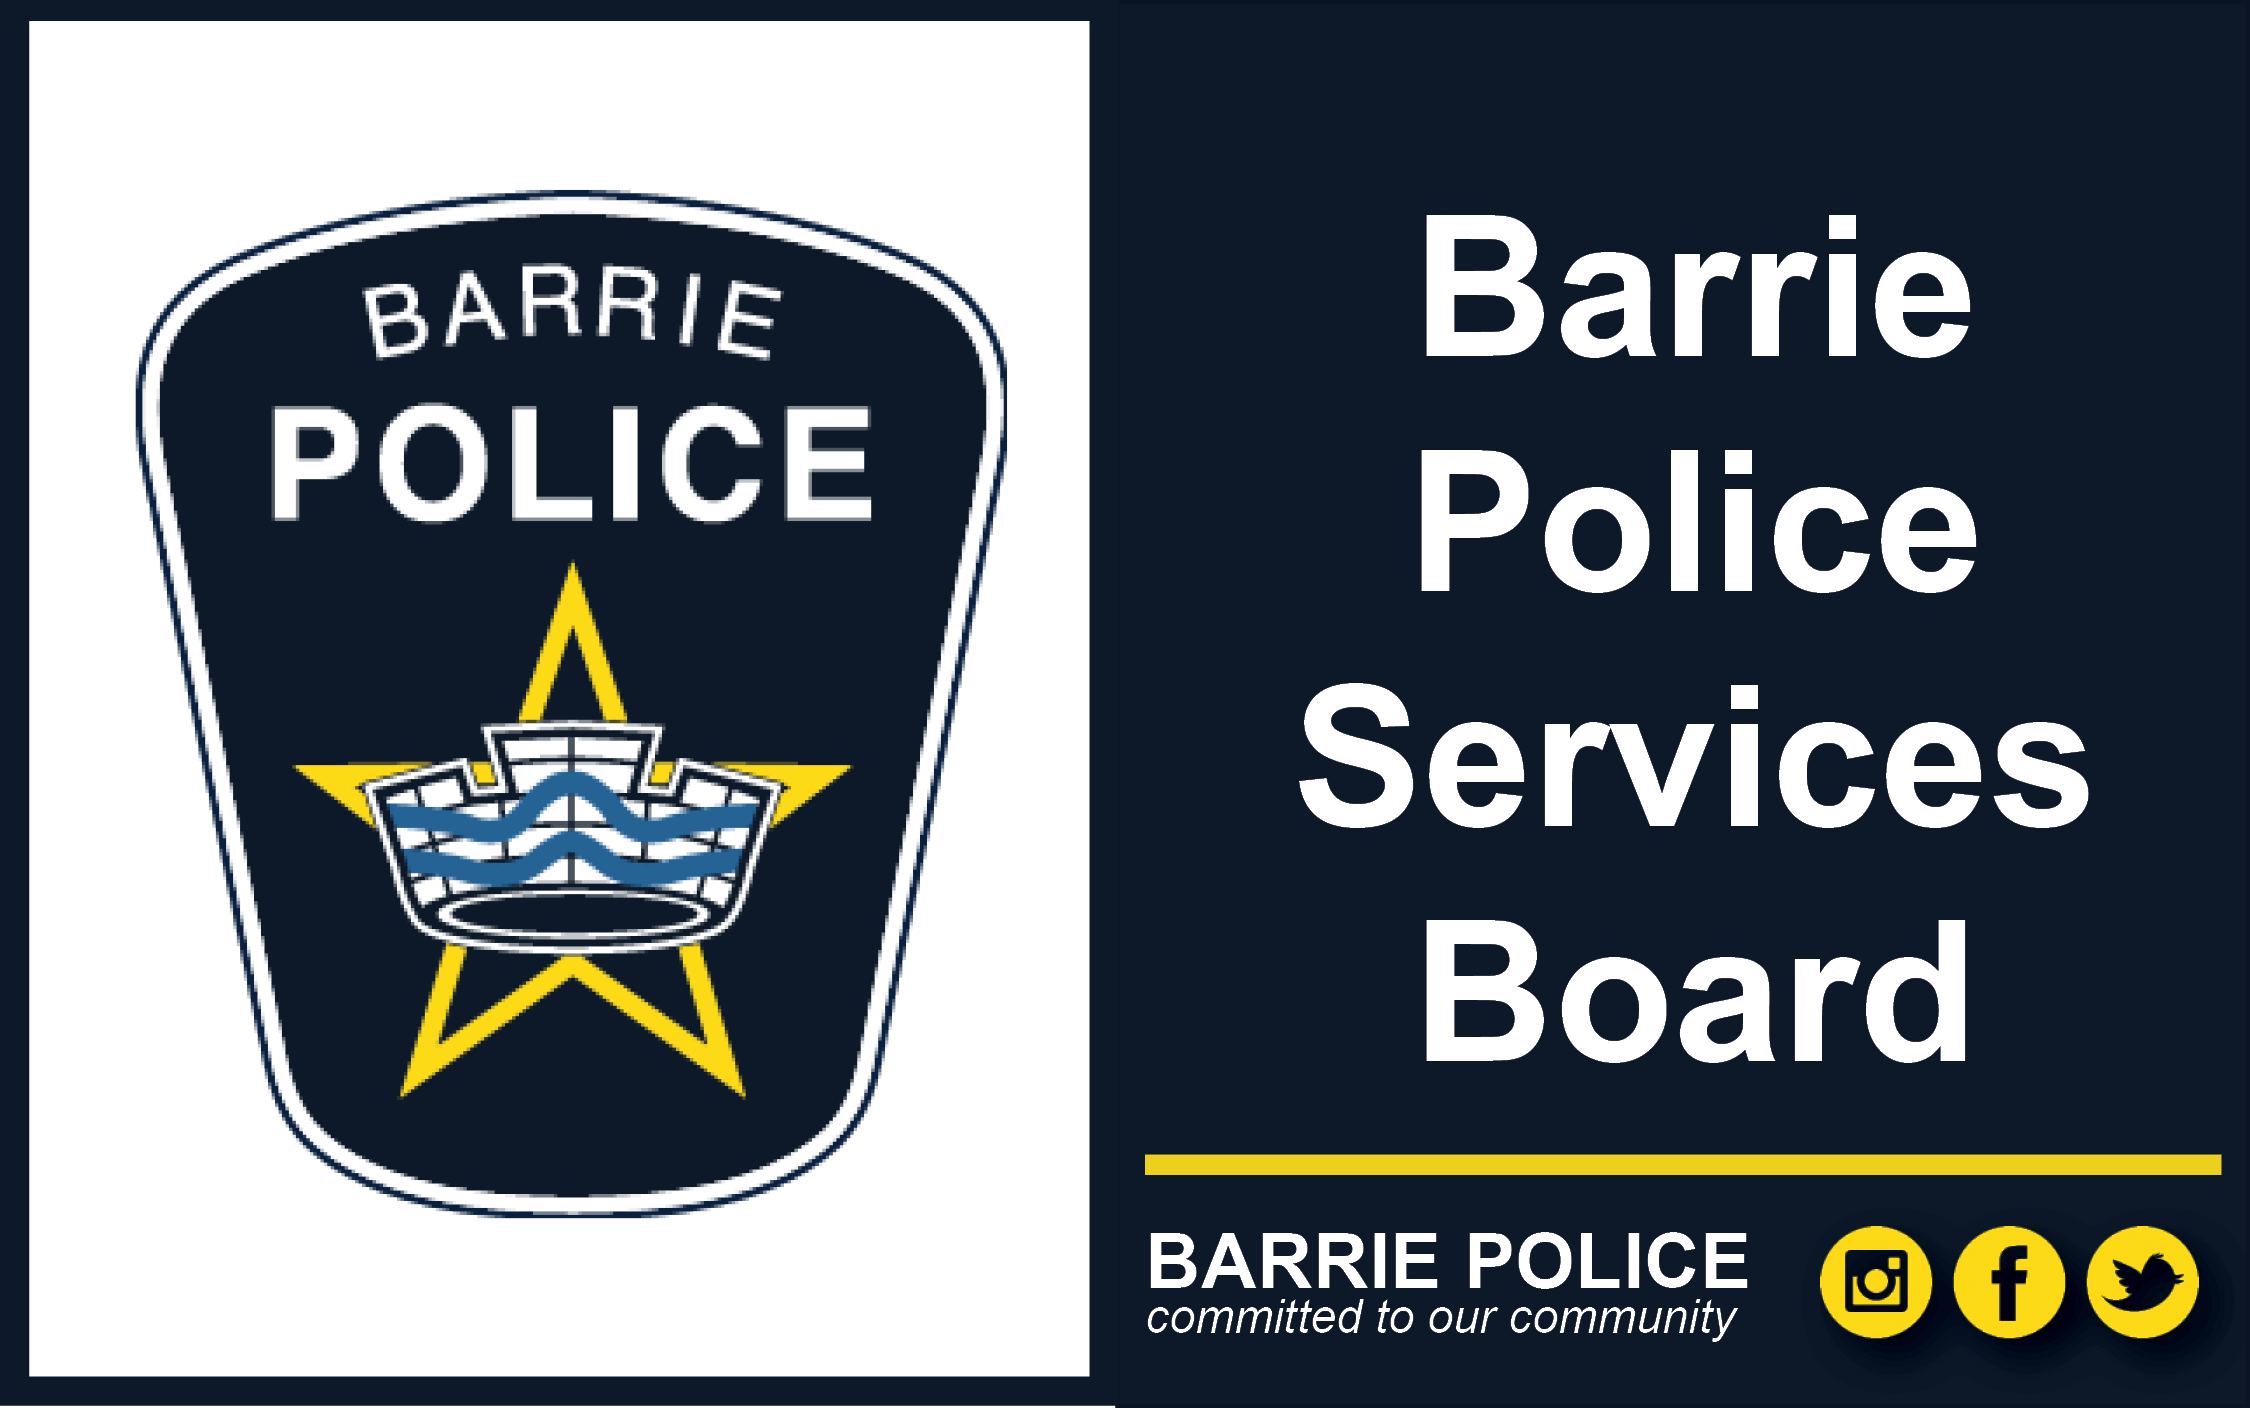 Graphic - Barrie Police Services Board